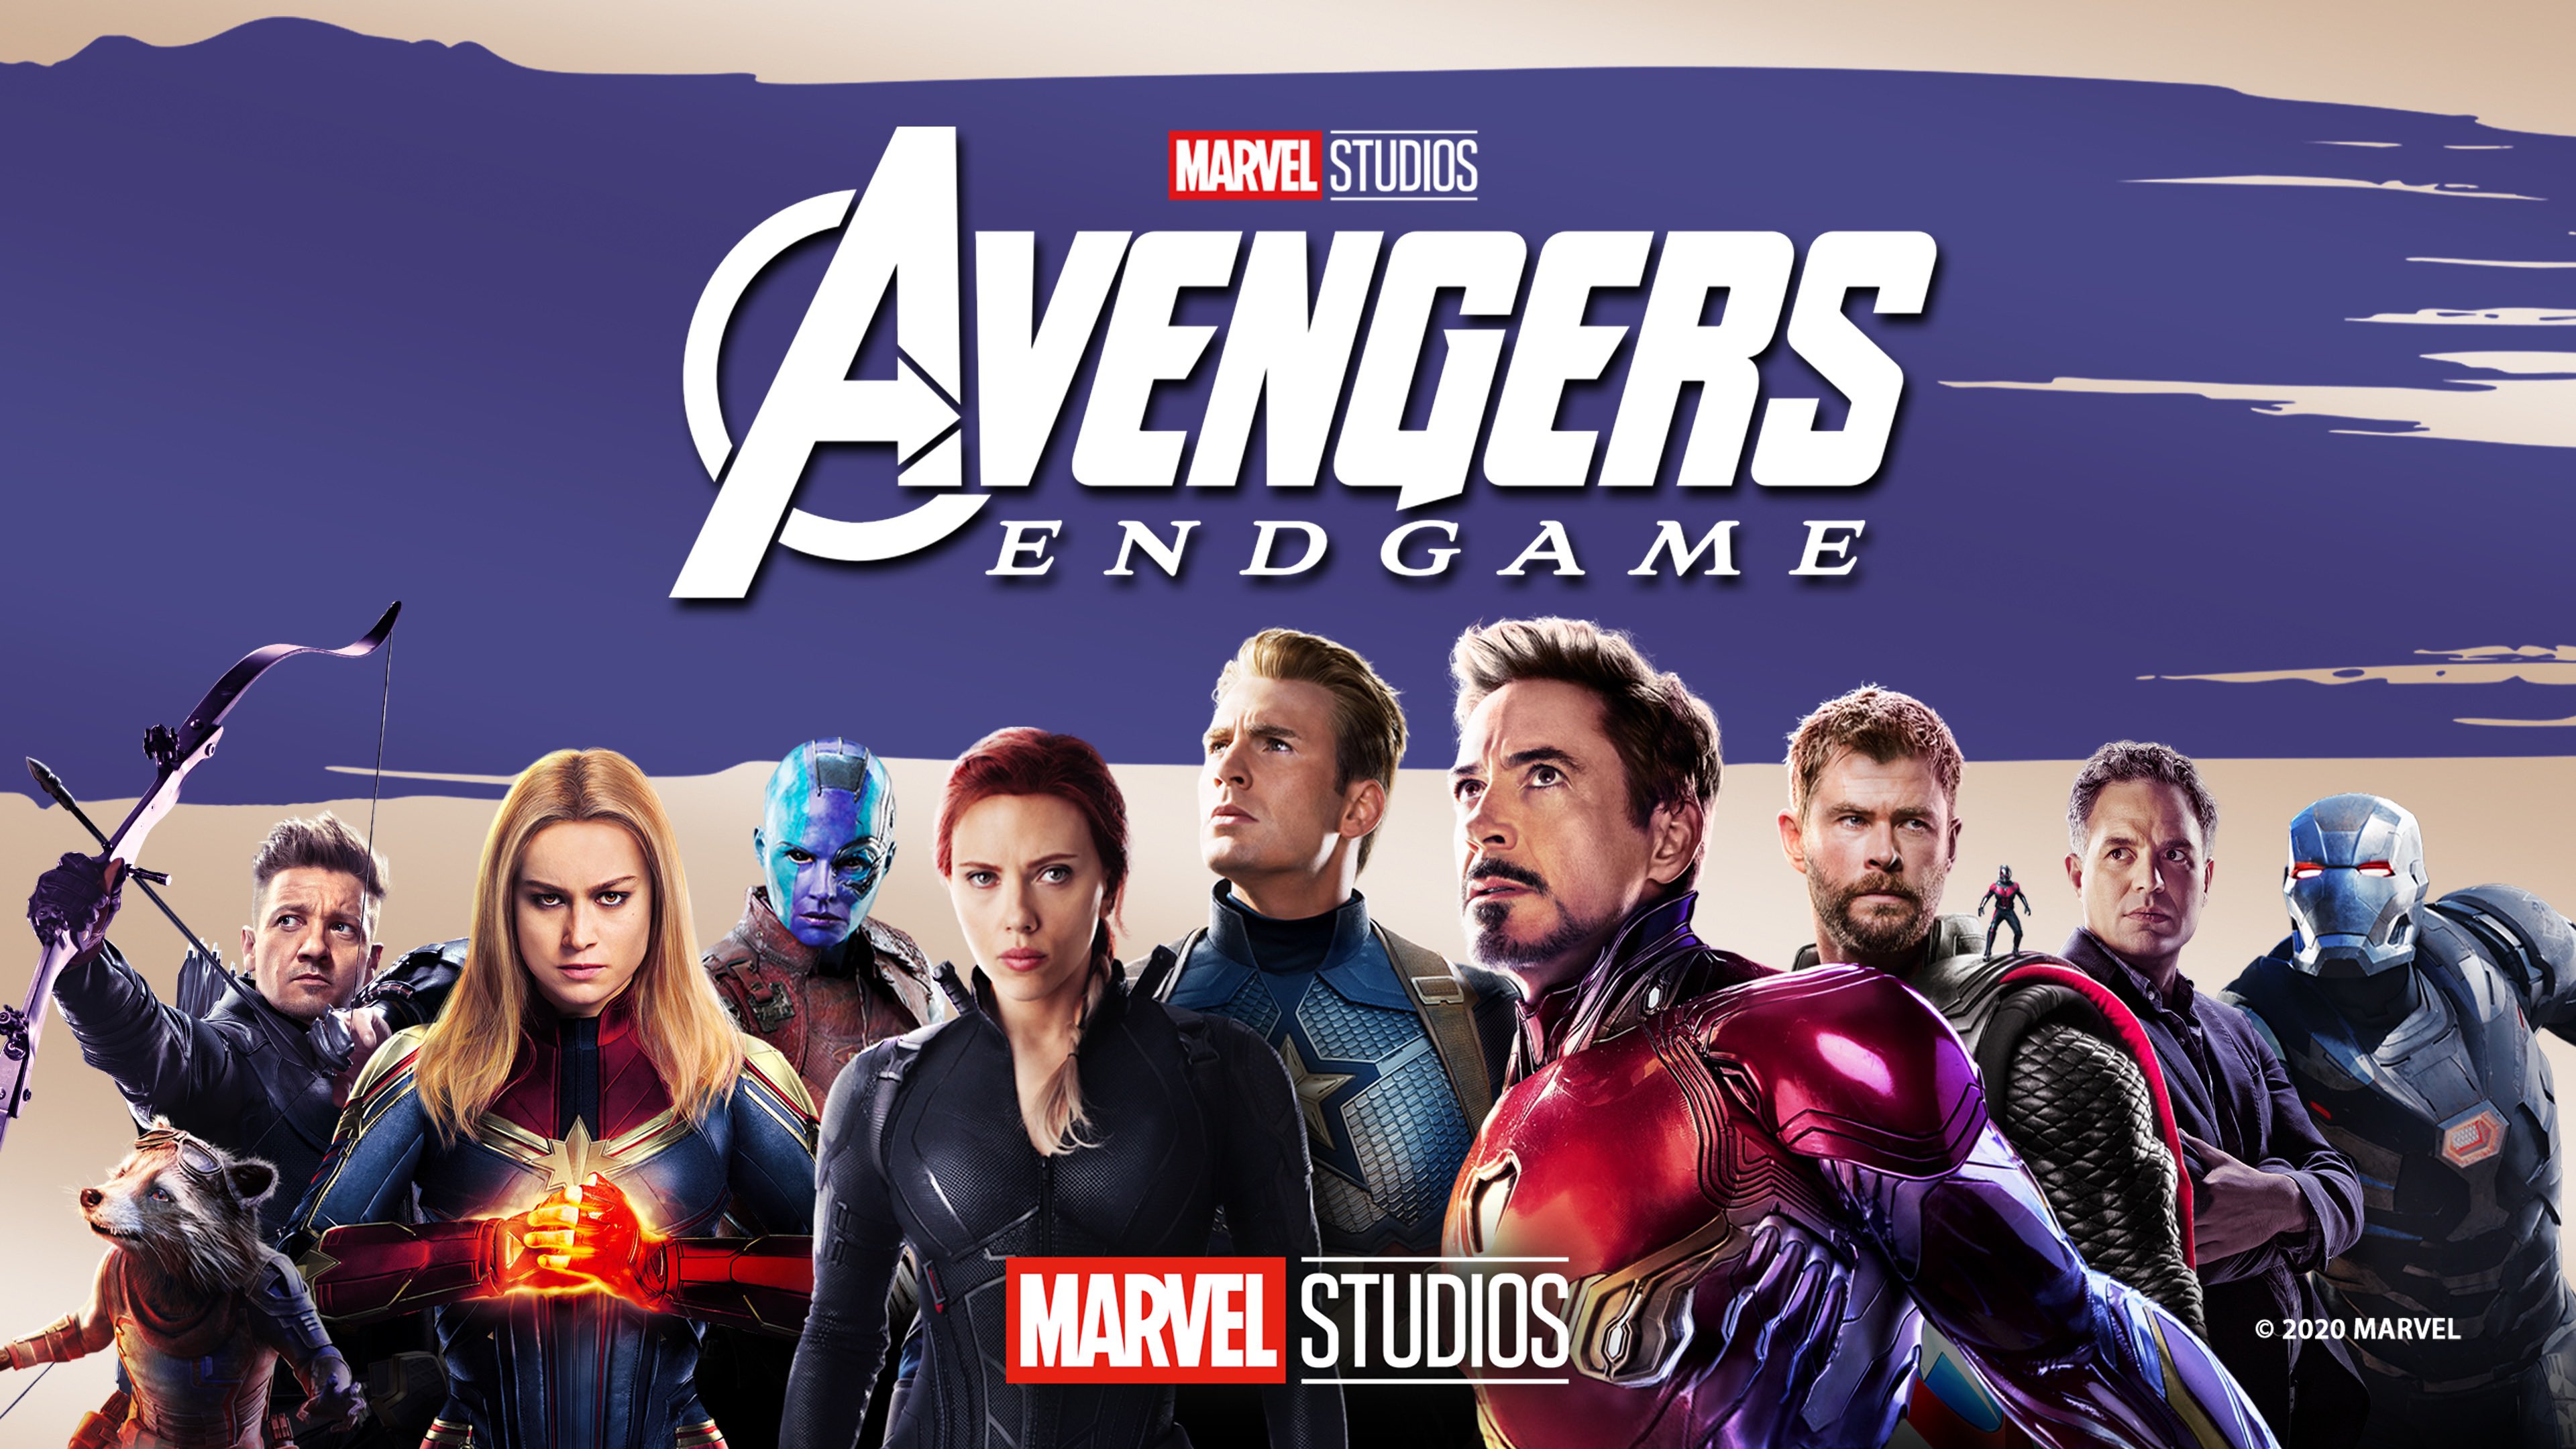 on Twitter: "#NowWatching: Avengers: Endgame - finally wrapping my head around this whole timeline and this is the first time fully understanding everything. love this movie. https://t.co/eDkEAsij3S" / Twitter